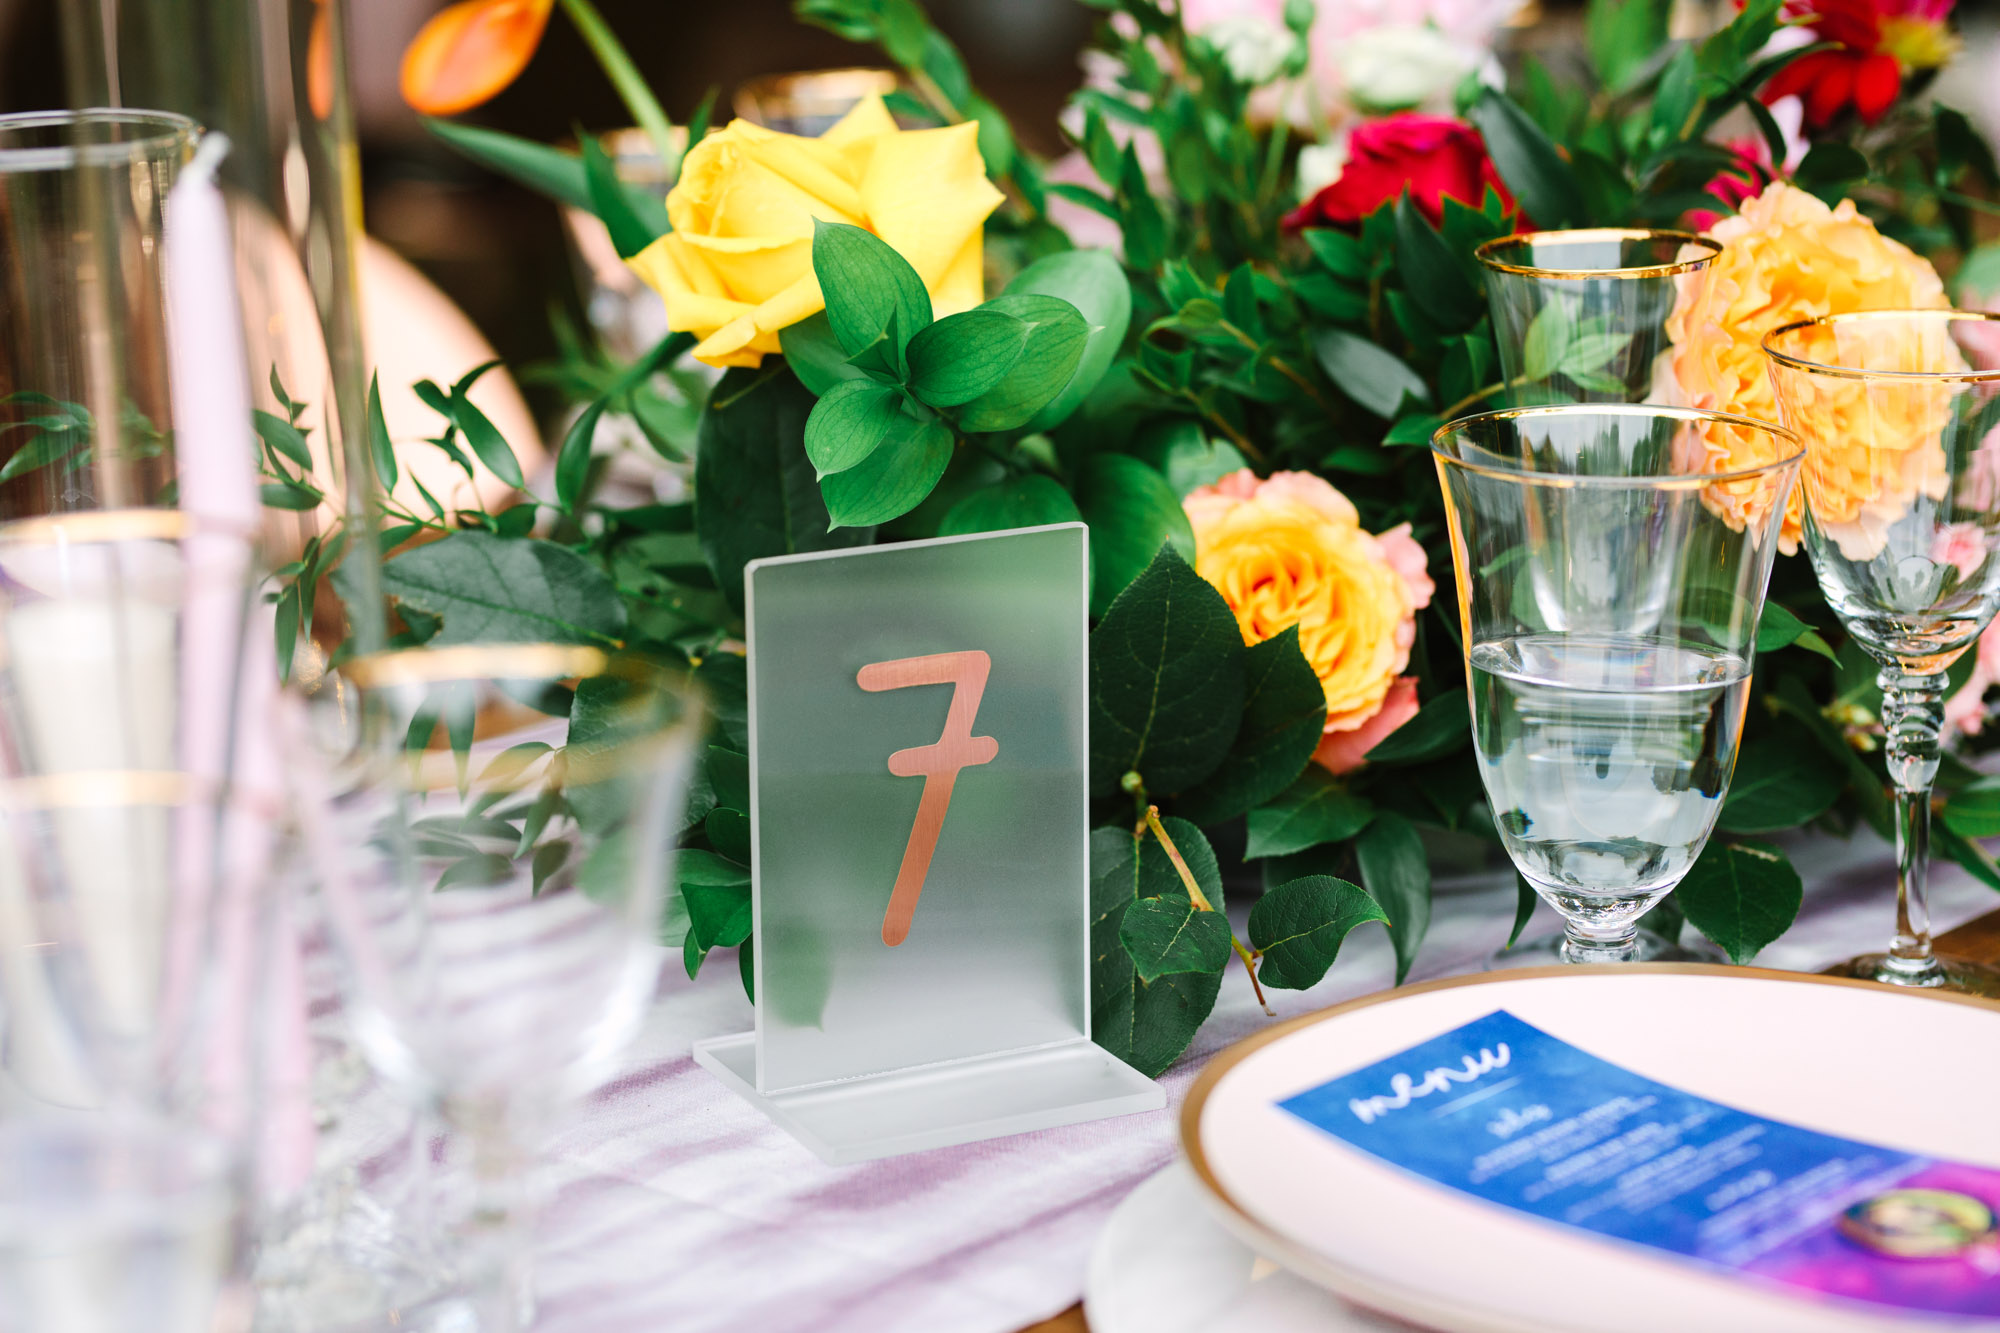 Table number at wedding reception by Mary Costa Photography